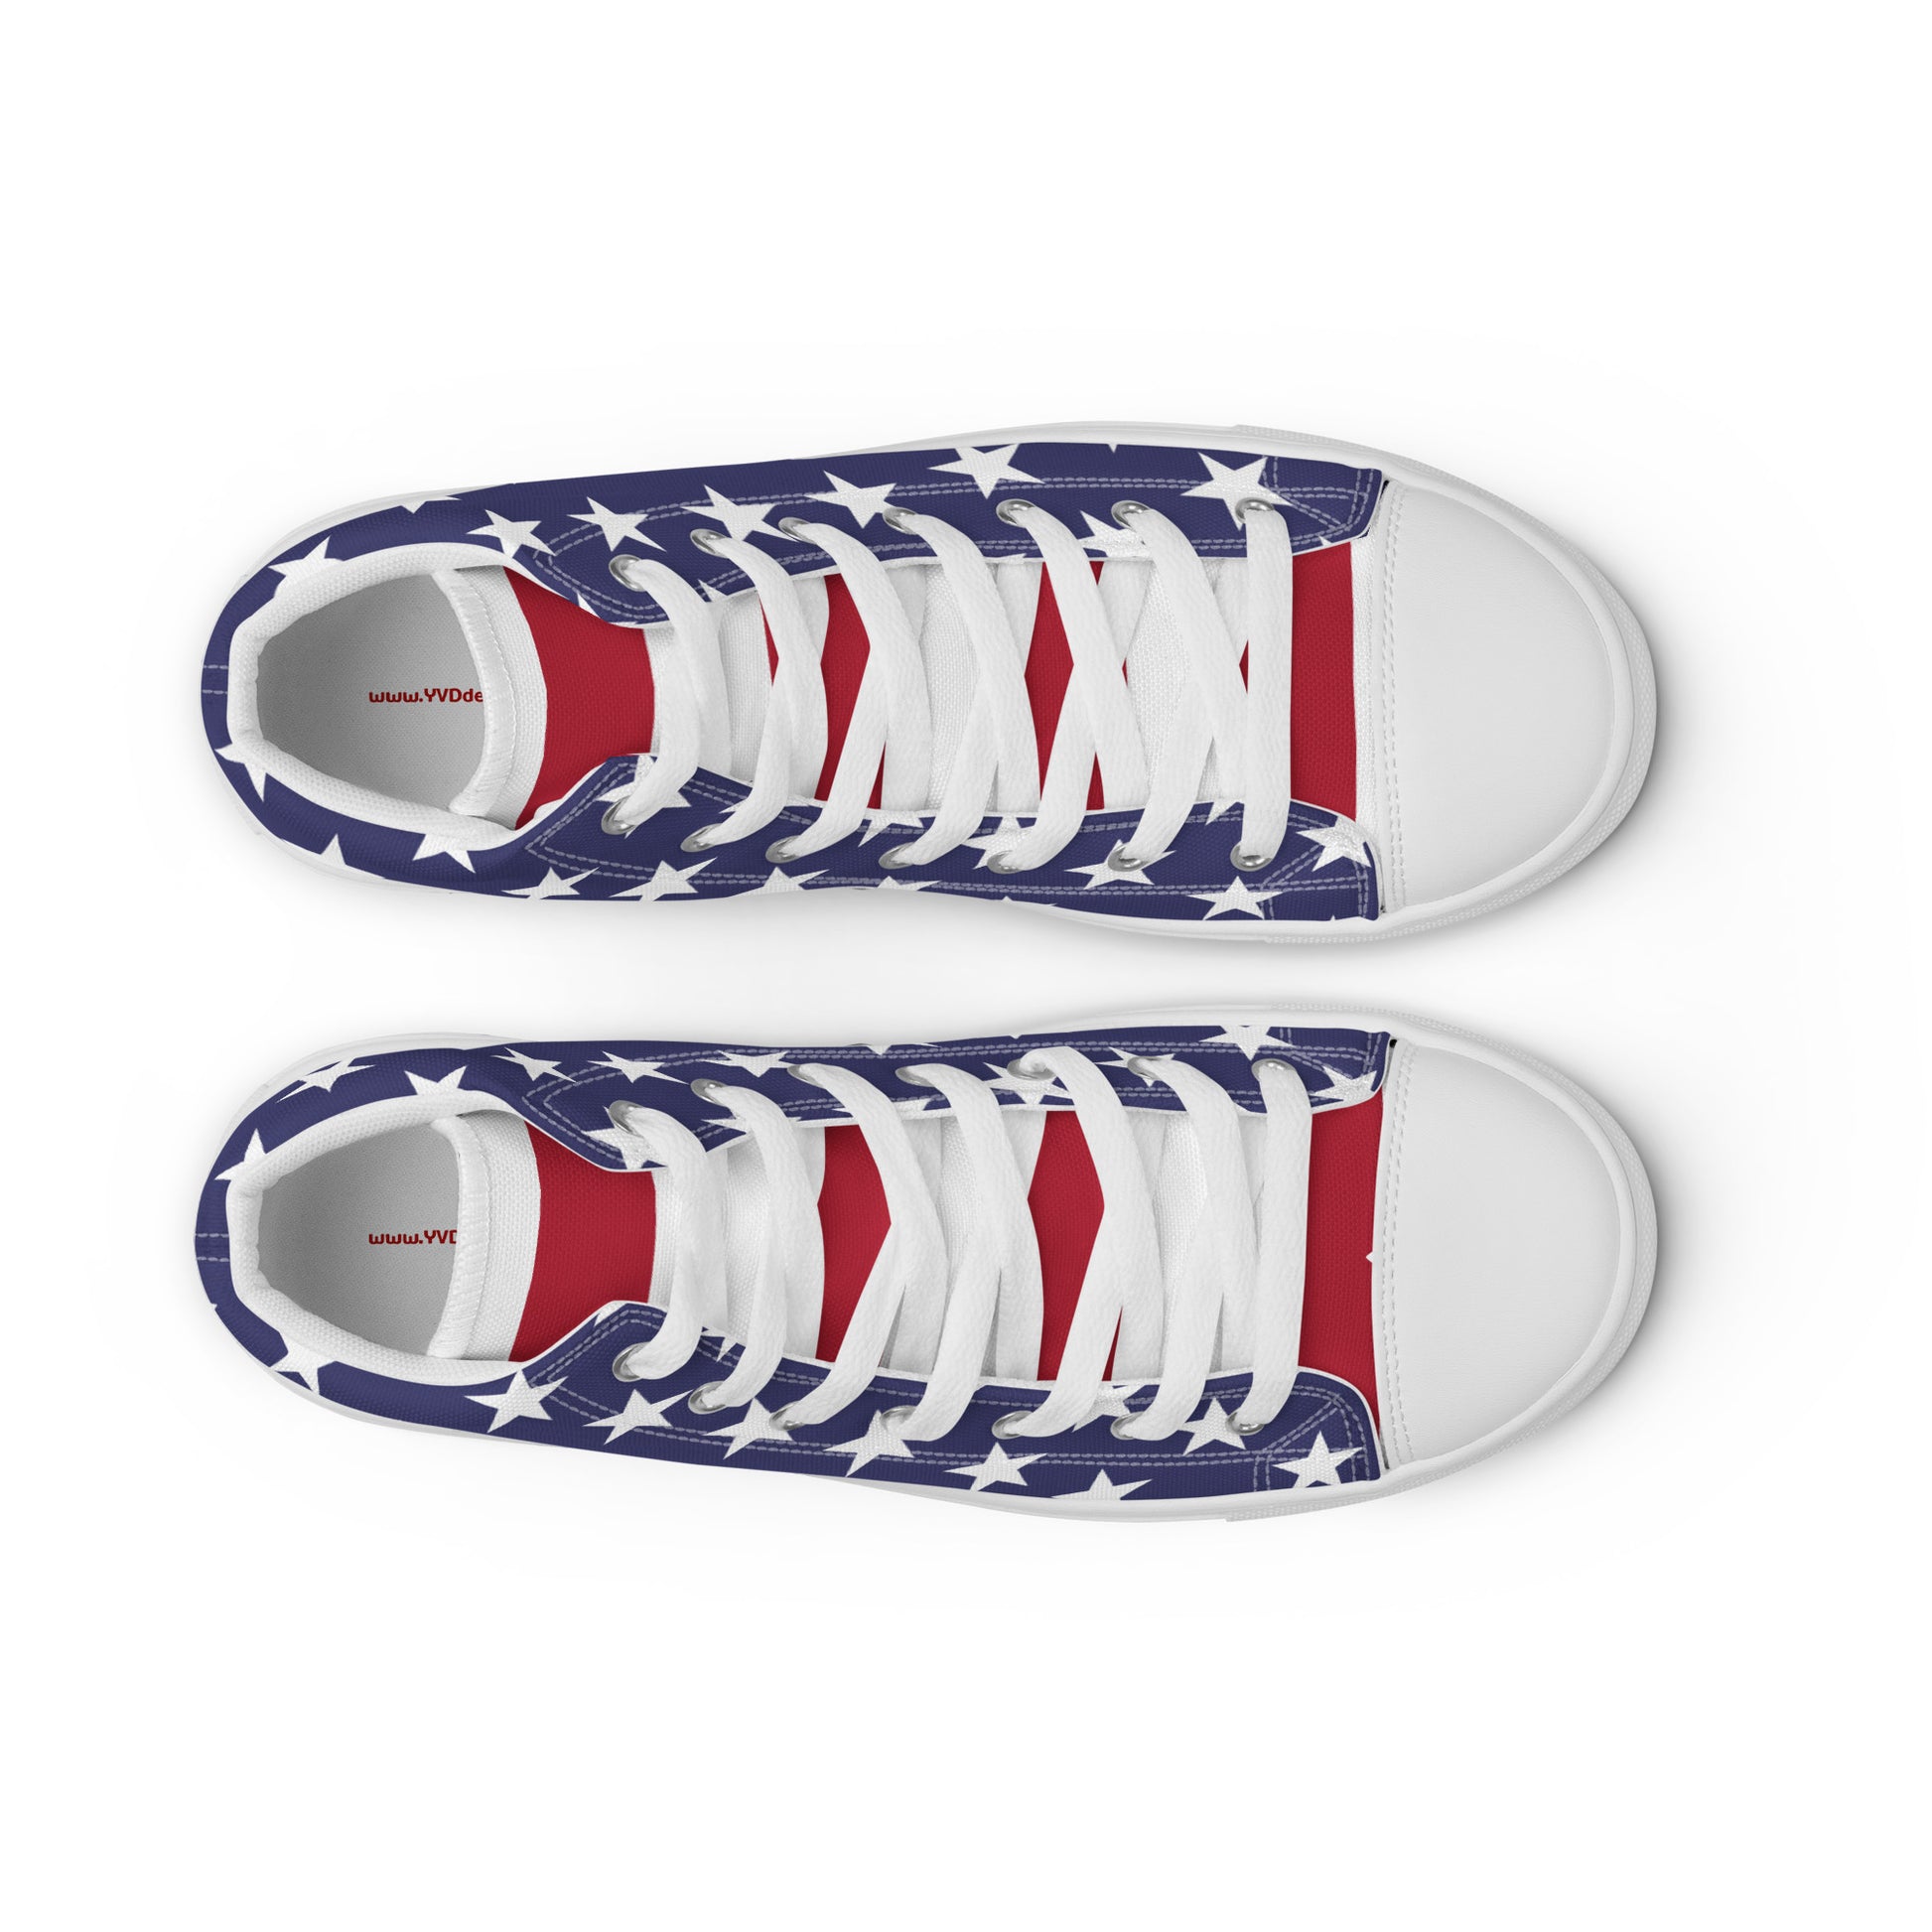 Cool High Top Sneakers For Men With American Flag Print